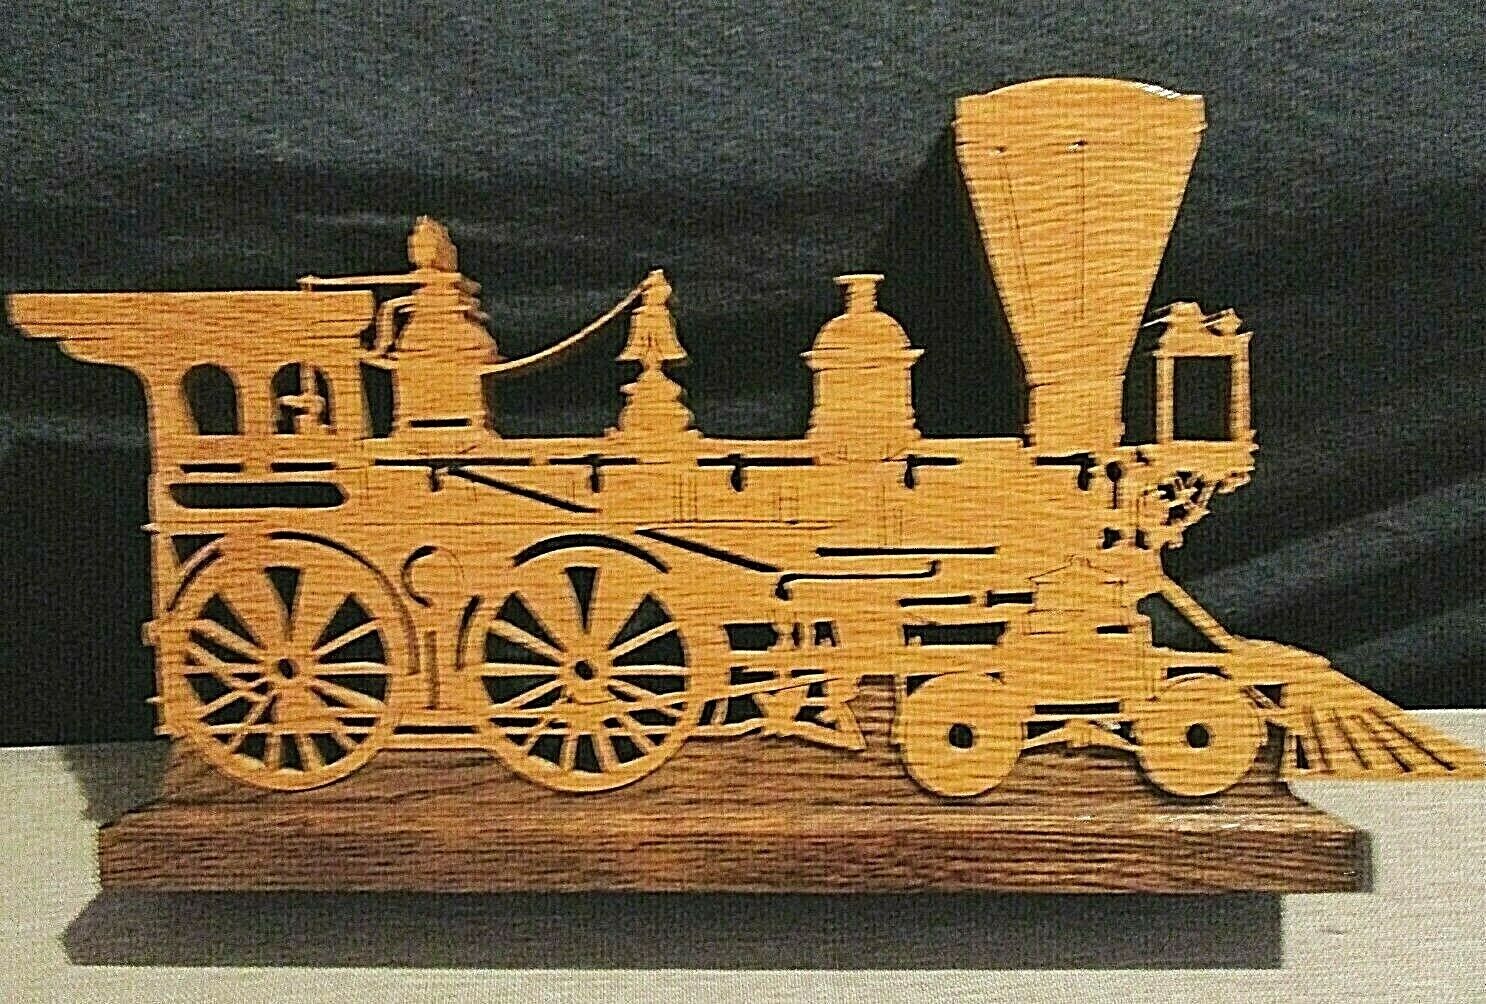 Train Engine Laser Wood Carving Handcrafted By Dan Weyers 14 x 8 x 1\